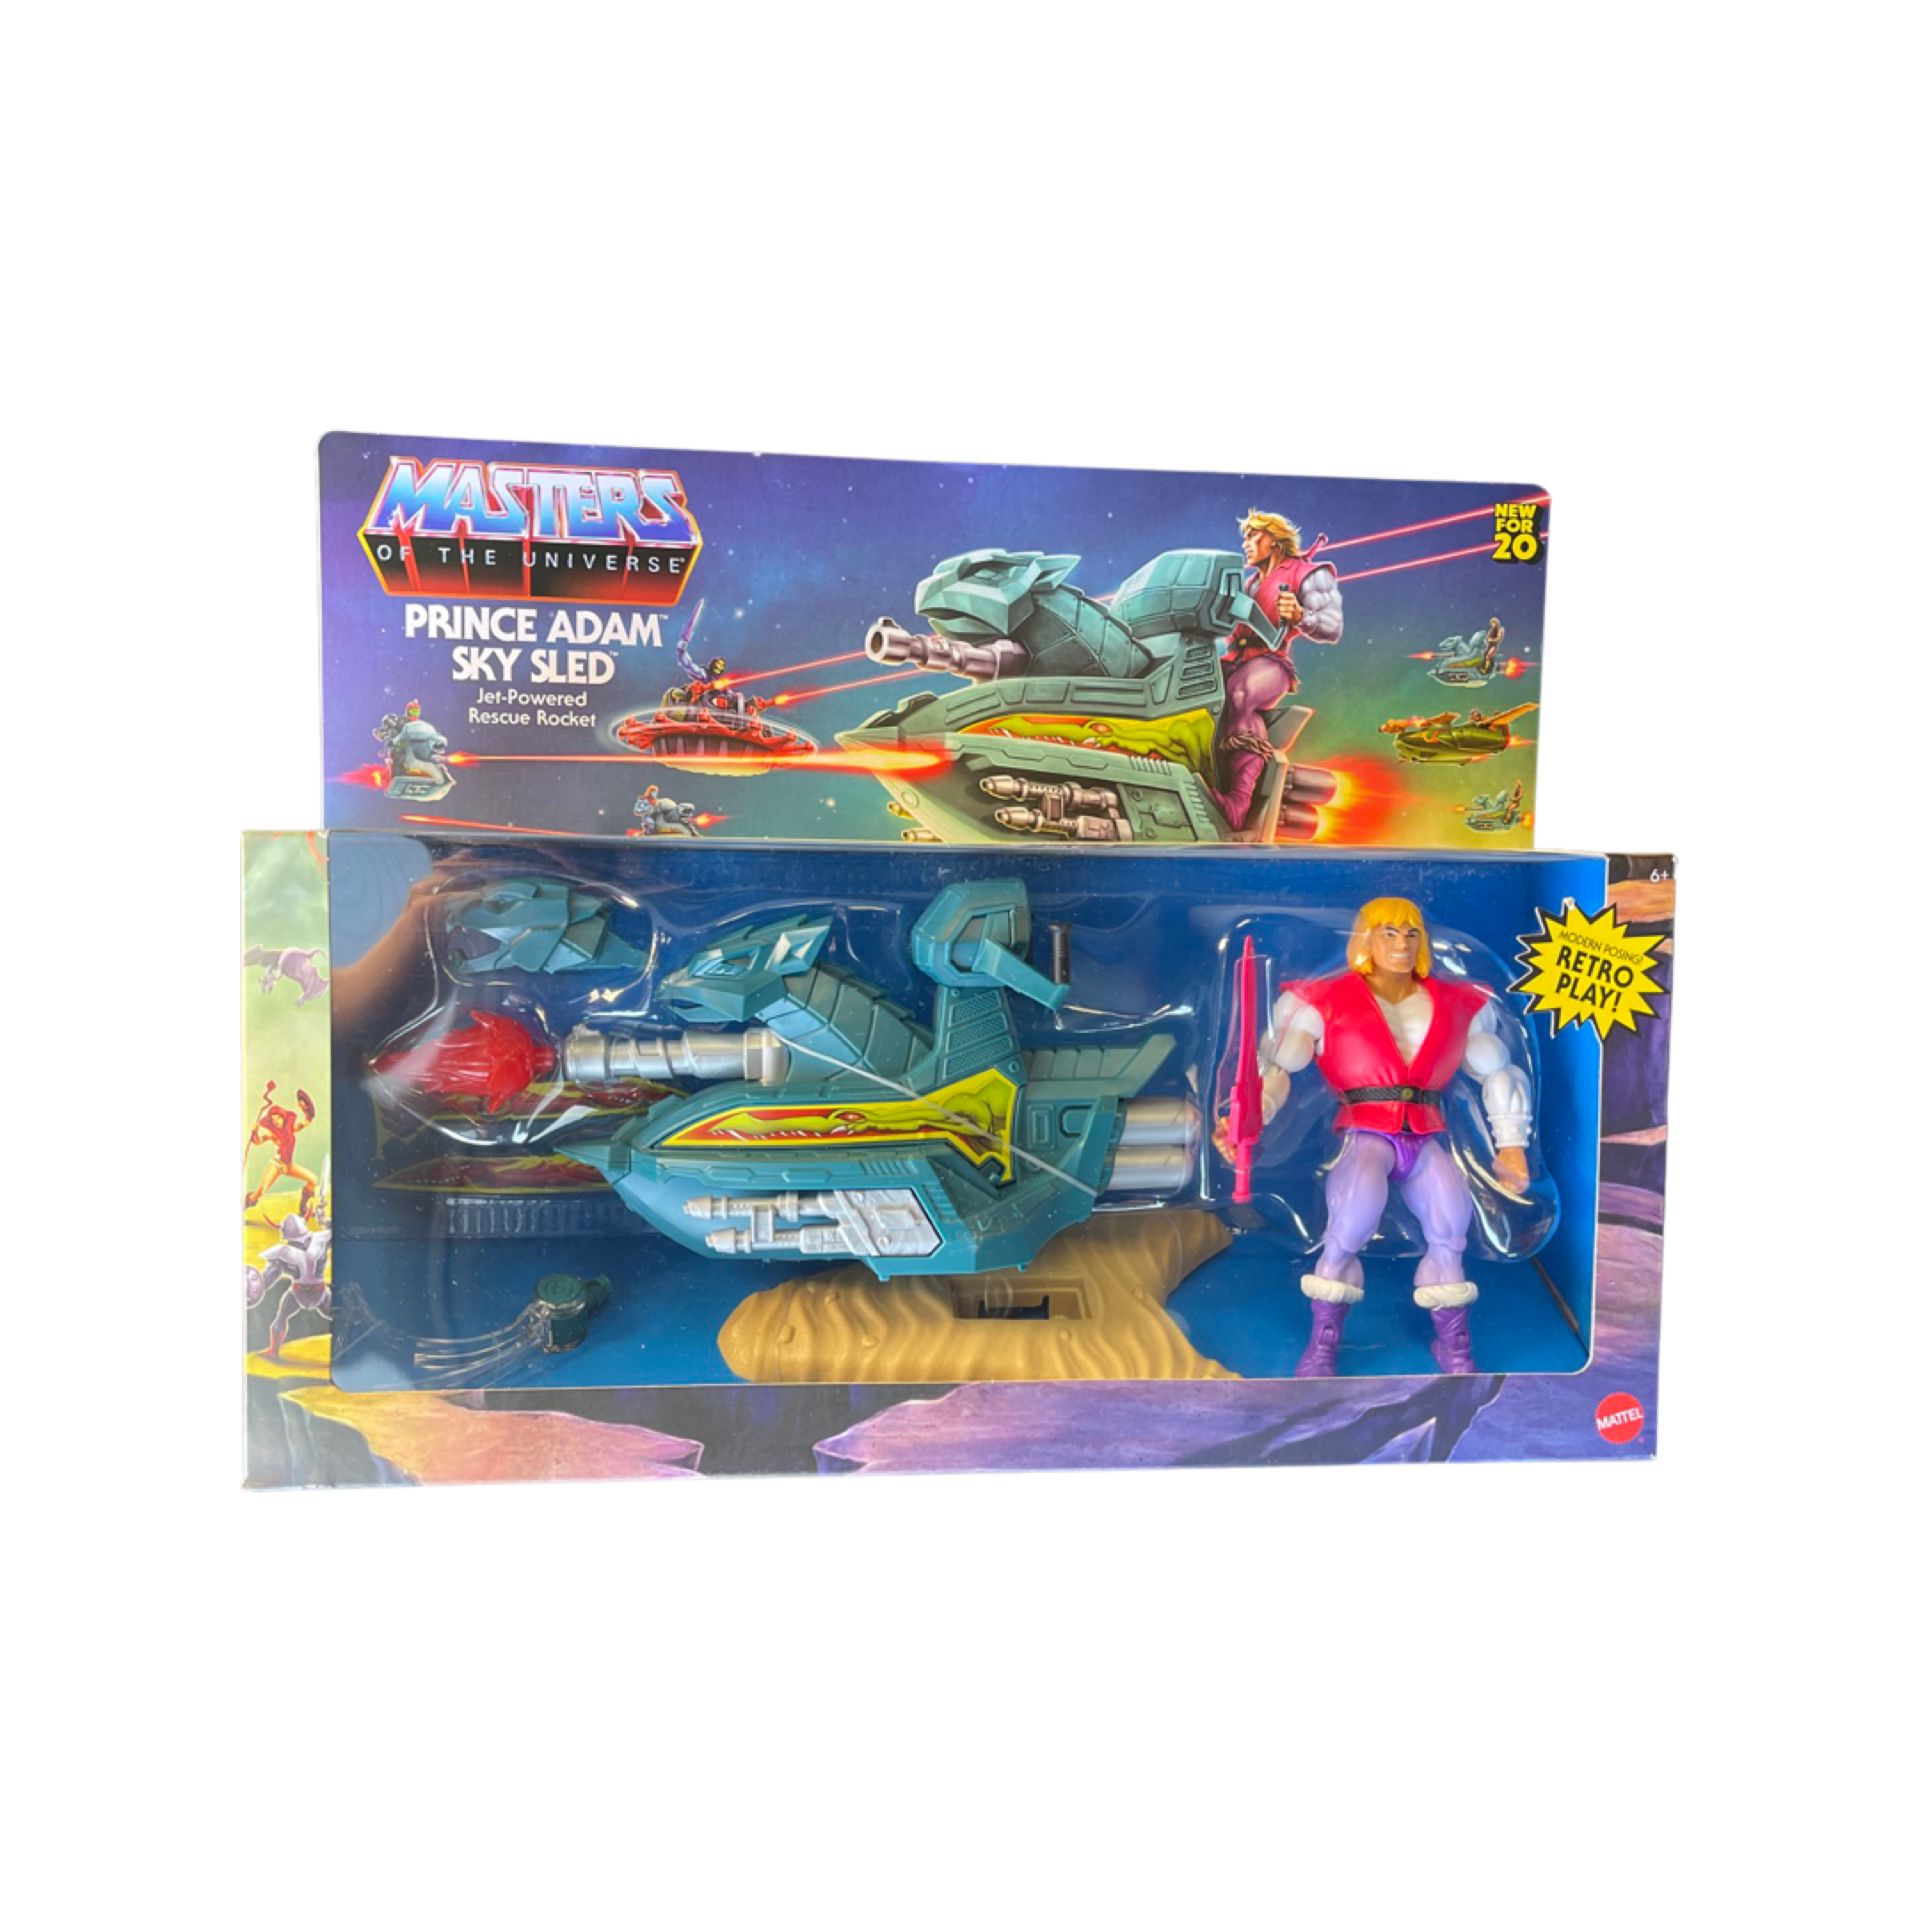 He-Man & Master Of The Universe Prince Adam Sky Sled 